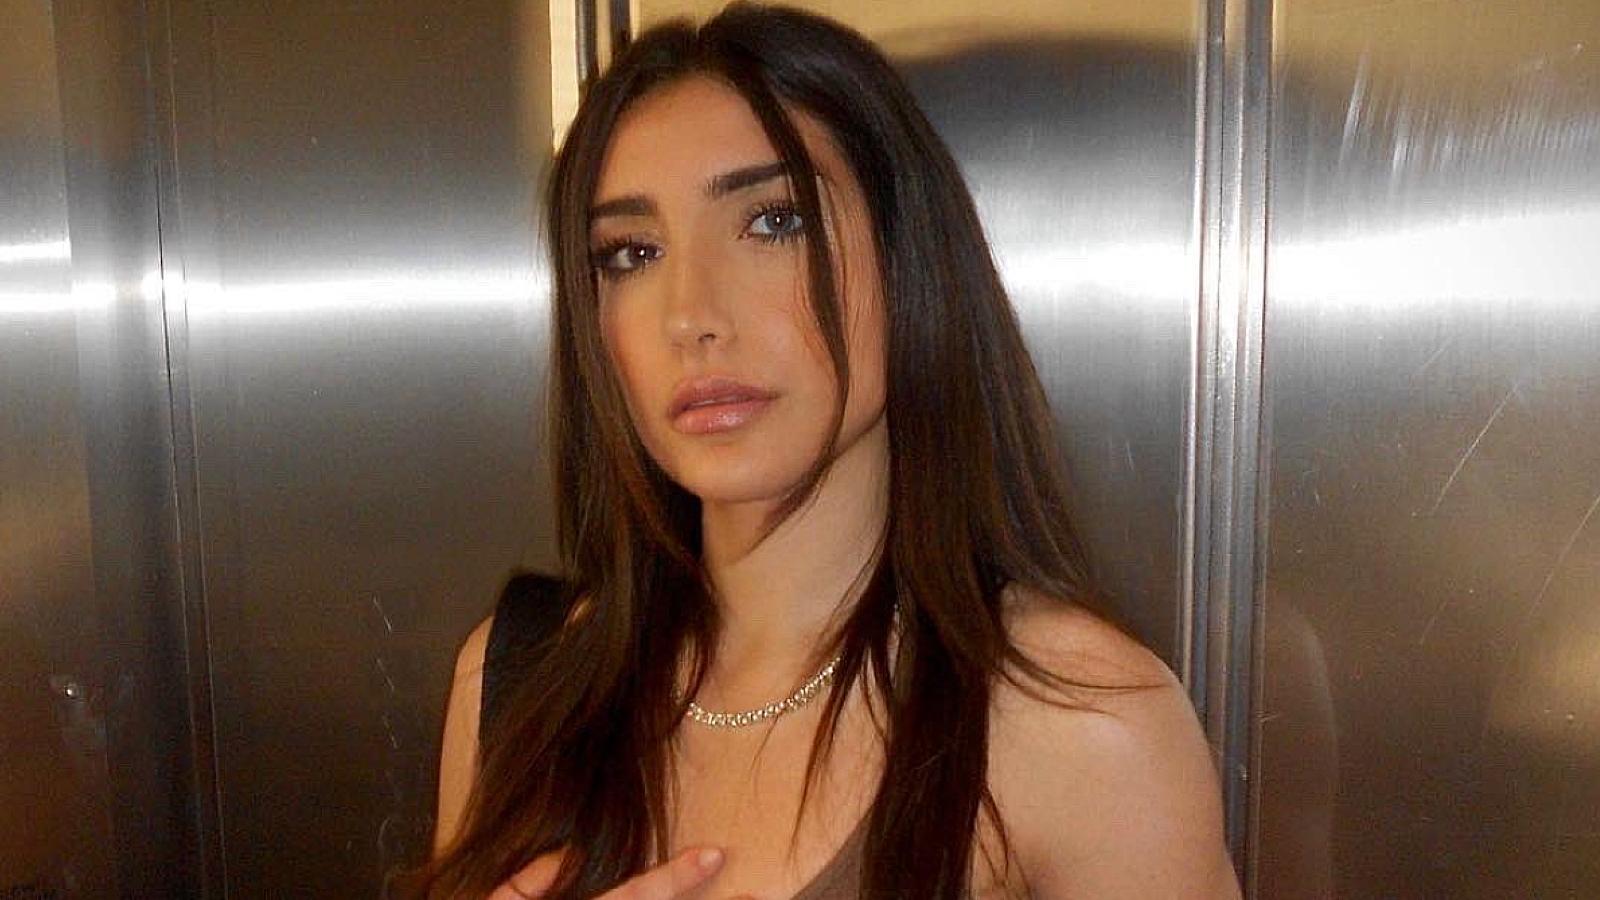 Picture of Nadia in an elevator